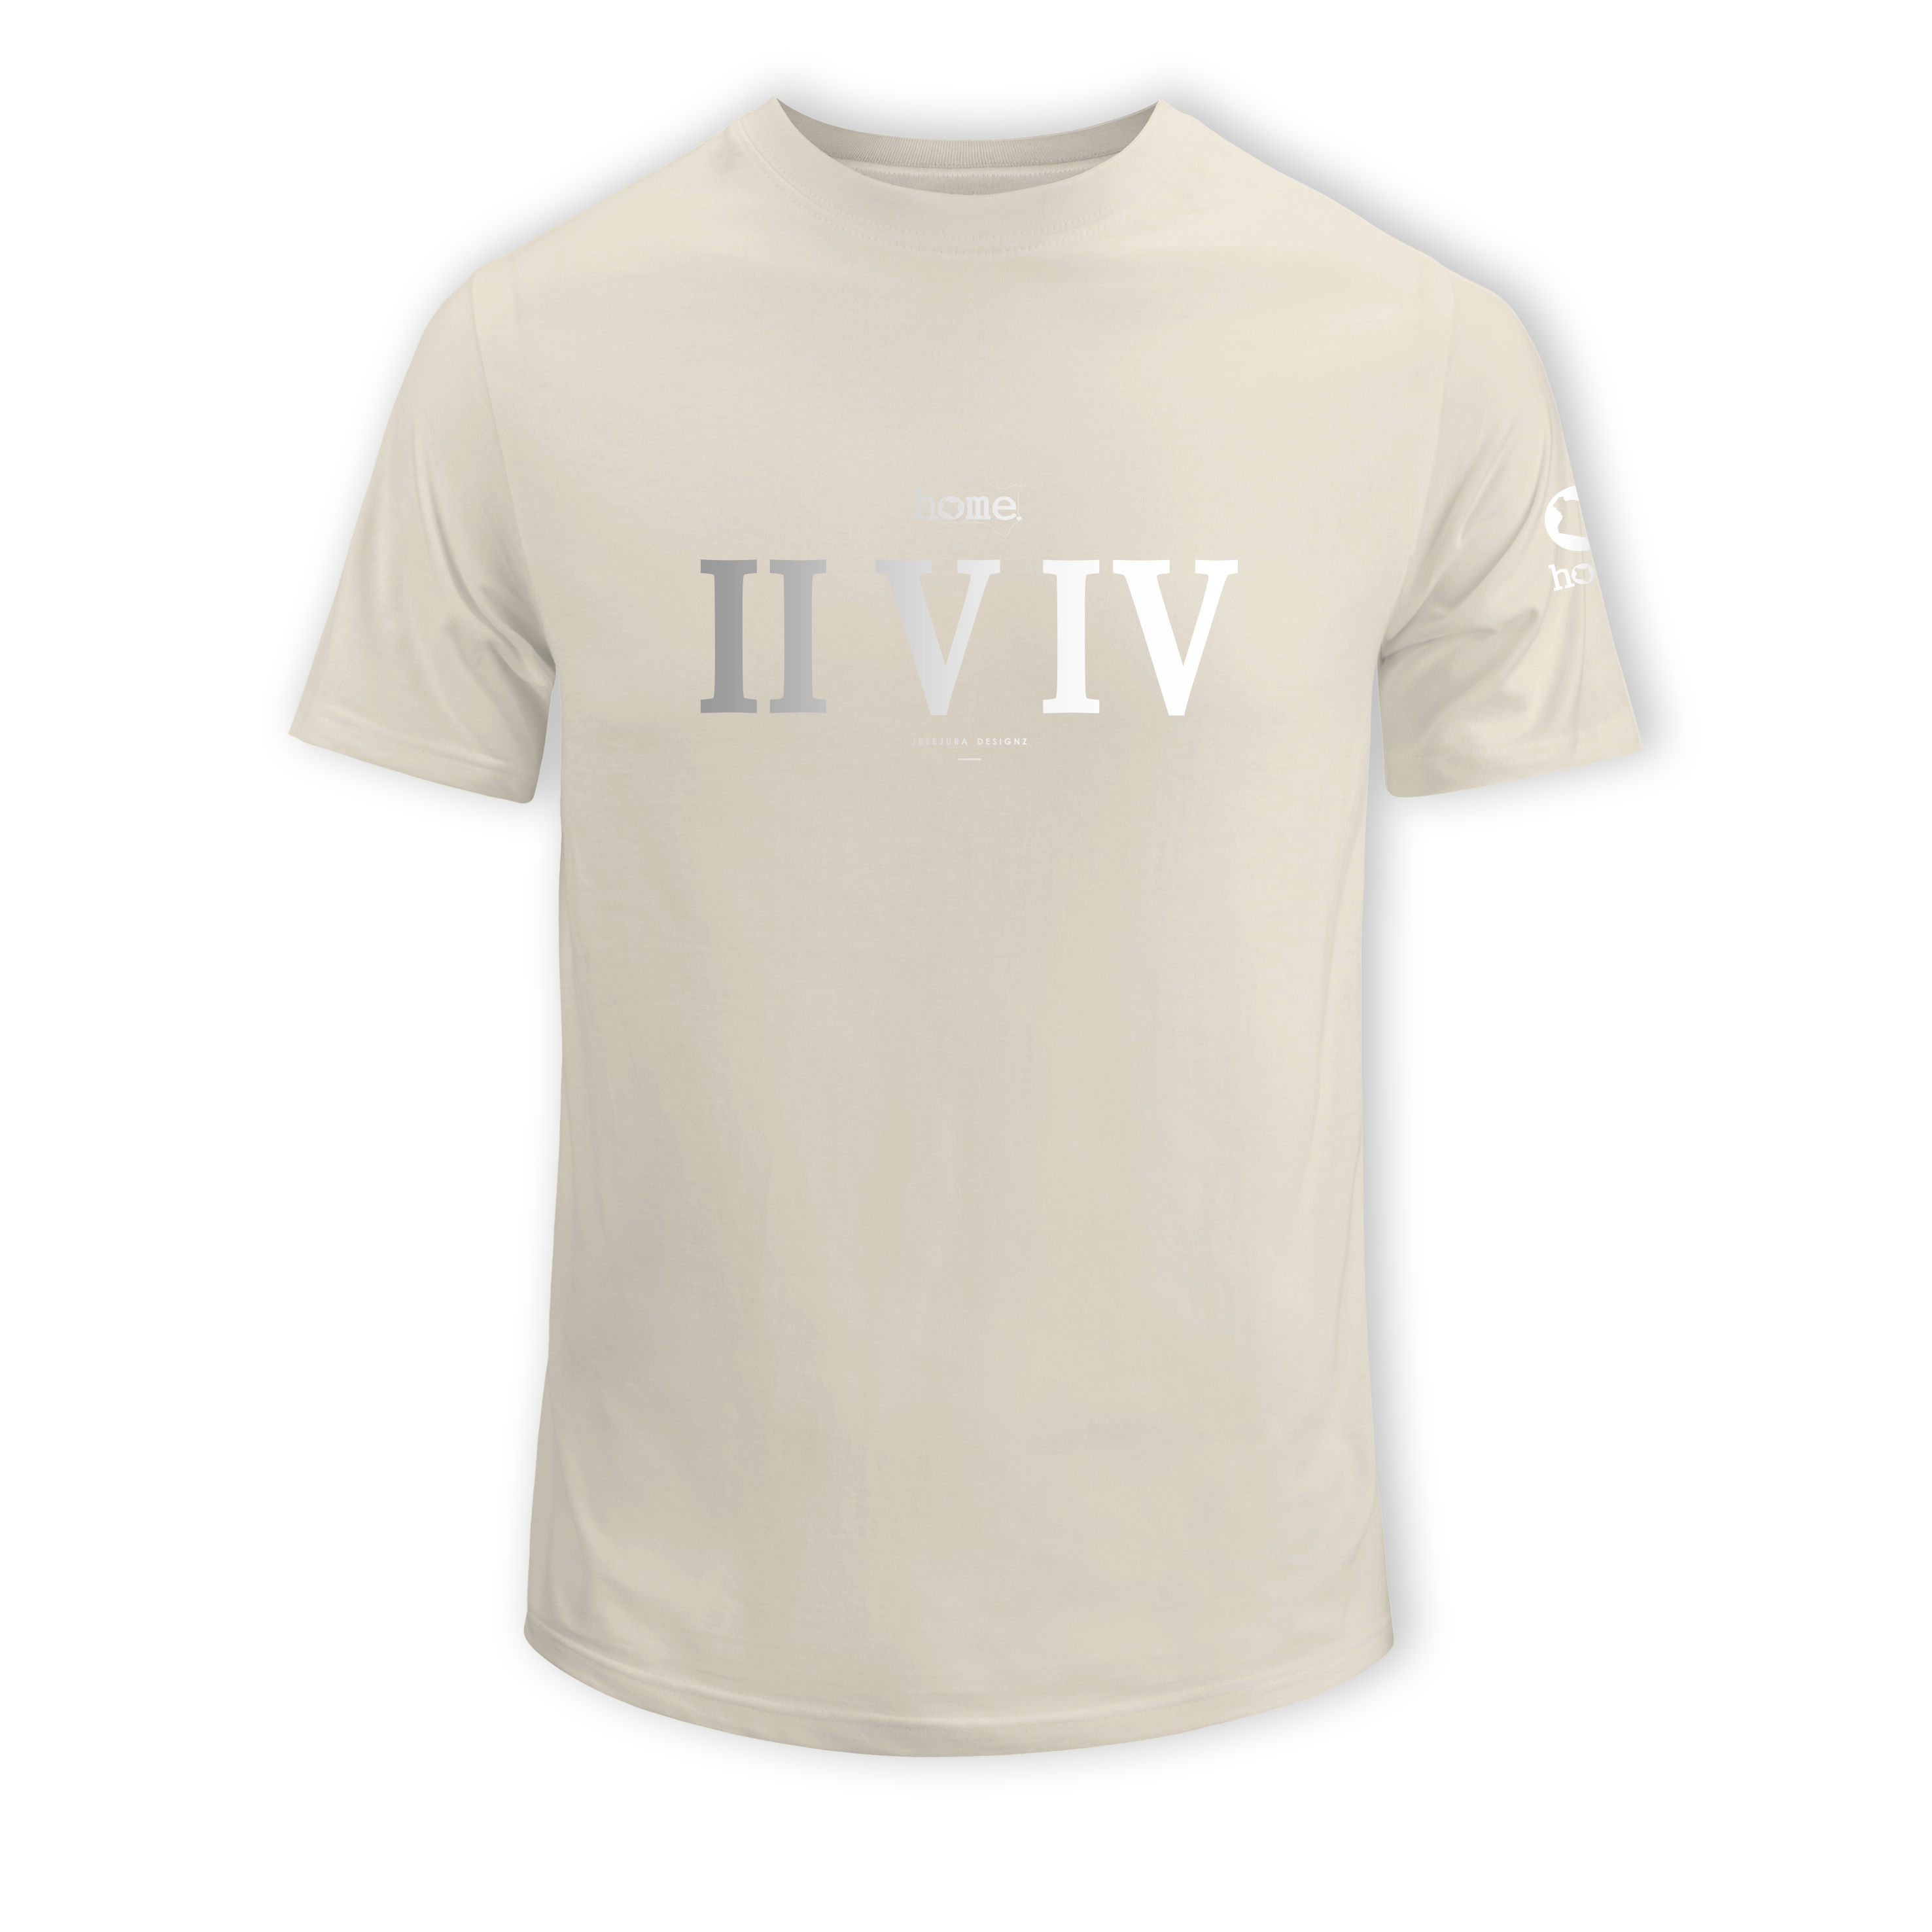 home_254 SHORT-SLEEVED NUDE T-SHIRT WITH A SILVER ROMAN NUMERALS PRINT – COTTON PLUS FABRIC